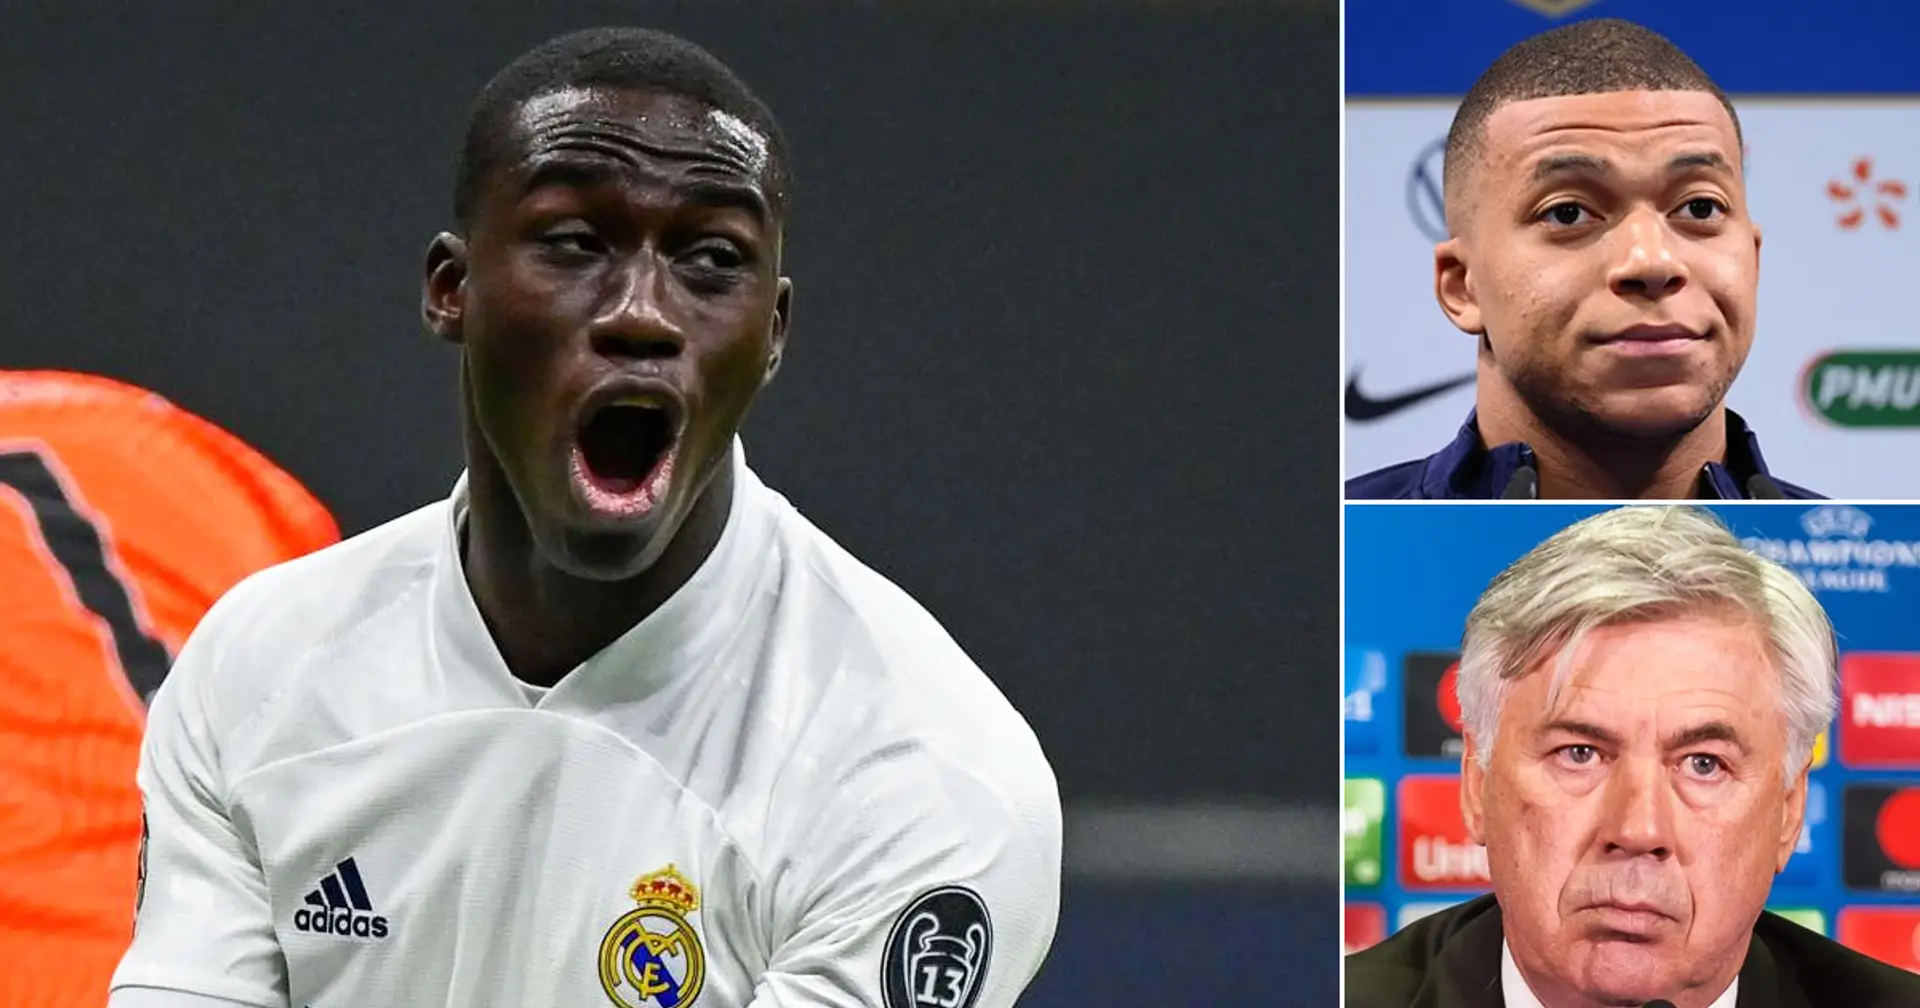 Fan suggests Mendy–Mbappe swap as Ferland's weakness could cost him Madrid career under Ancelotti